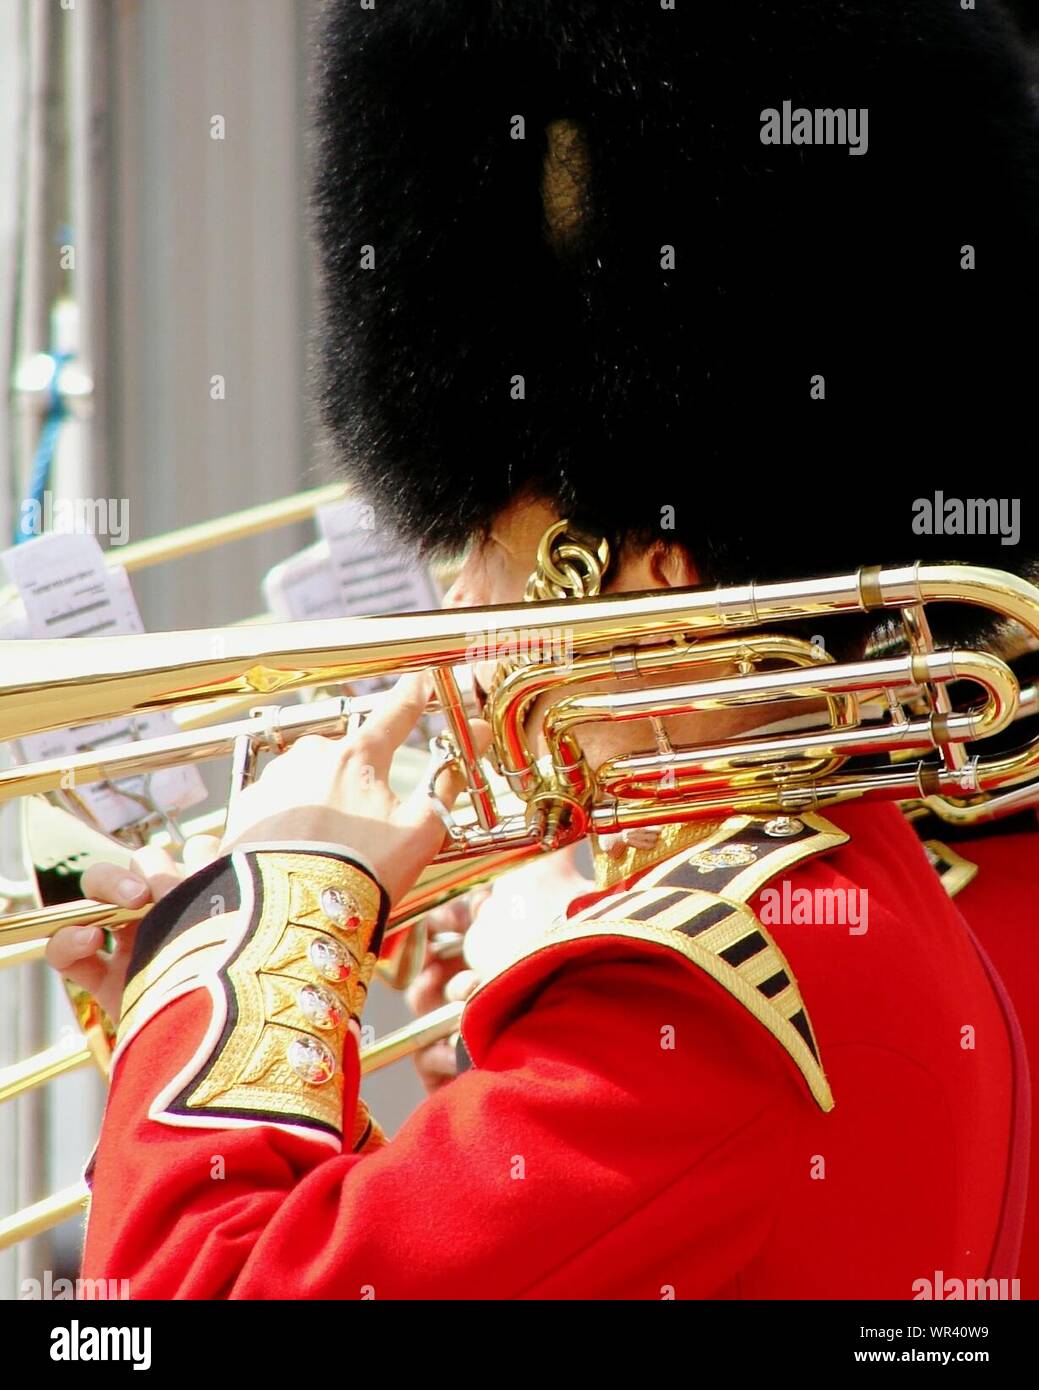 Side View Of British Royal Guard With Brass Instrument On Shoulder Stock Photo